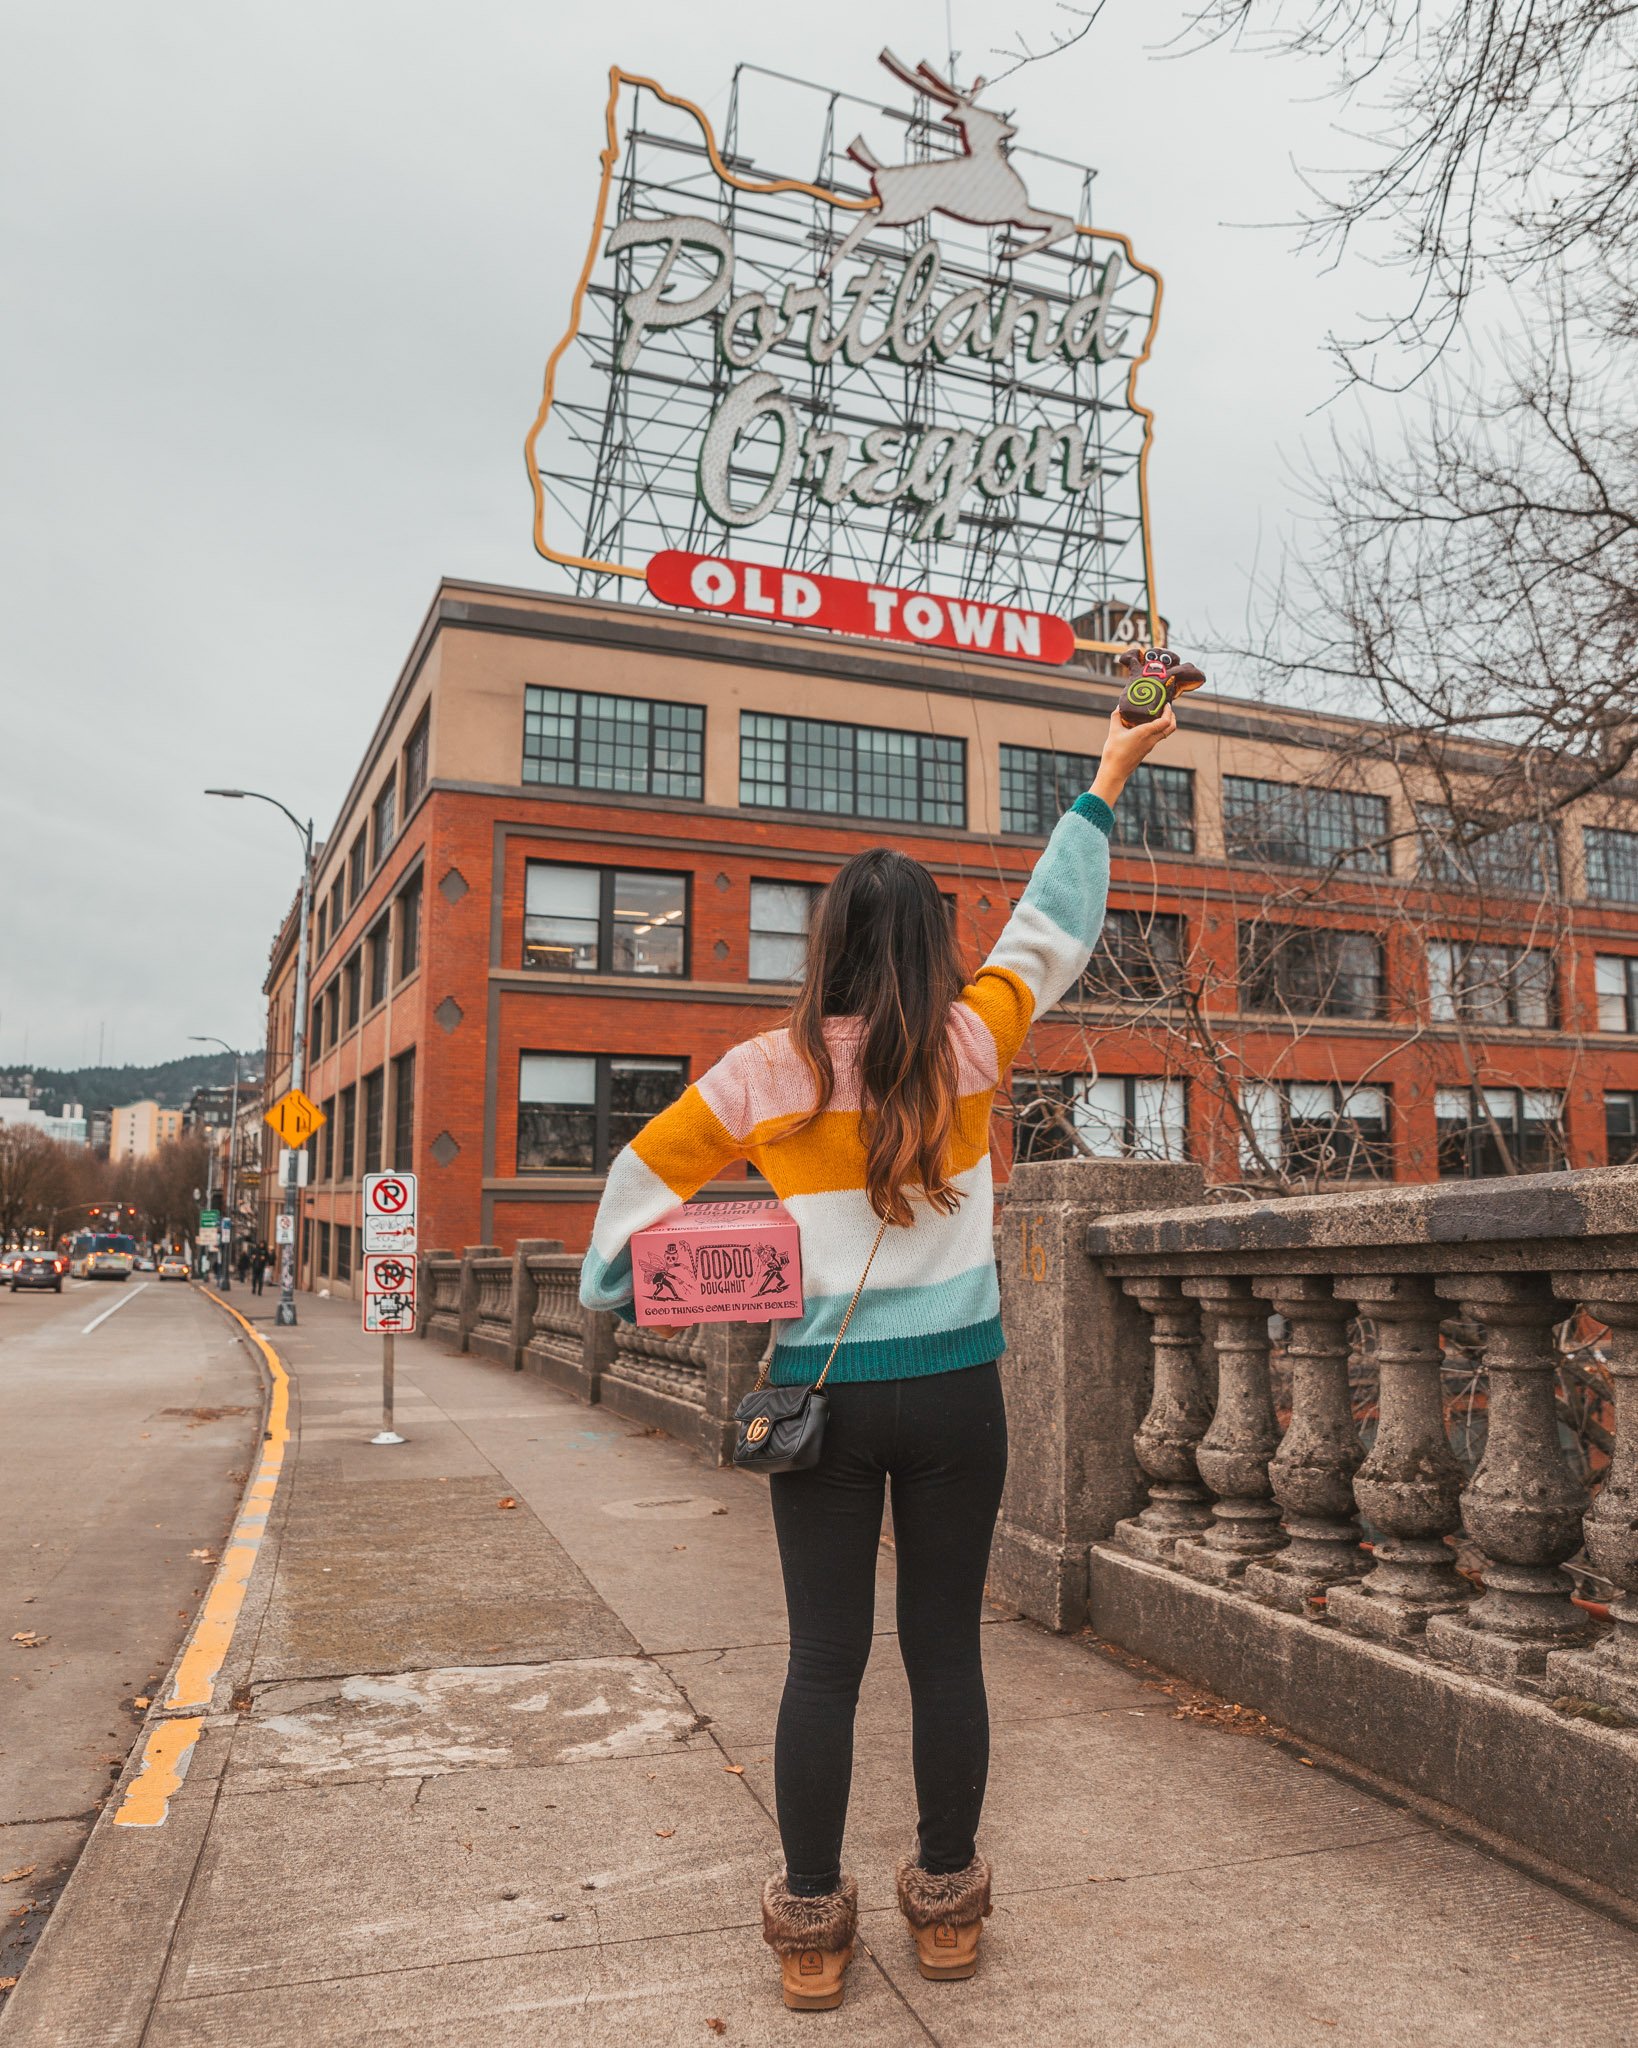 The famous Portland sign with Voodoo Doughnuts // Checking In: The Radisson Red in Downtown Portland, Oregon #readysetjetset #pdx #portland #blogpost #travelguide